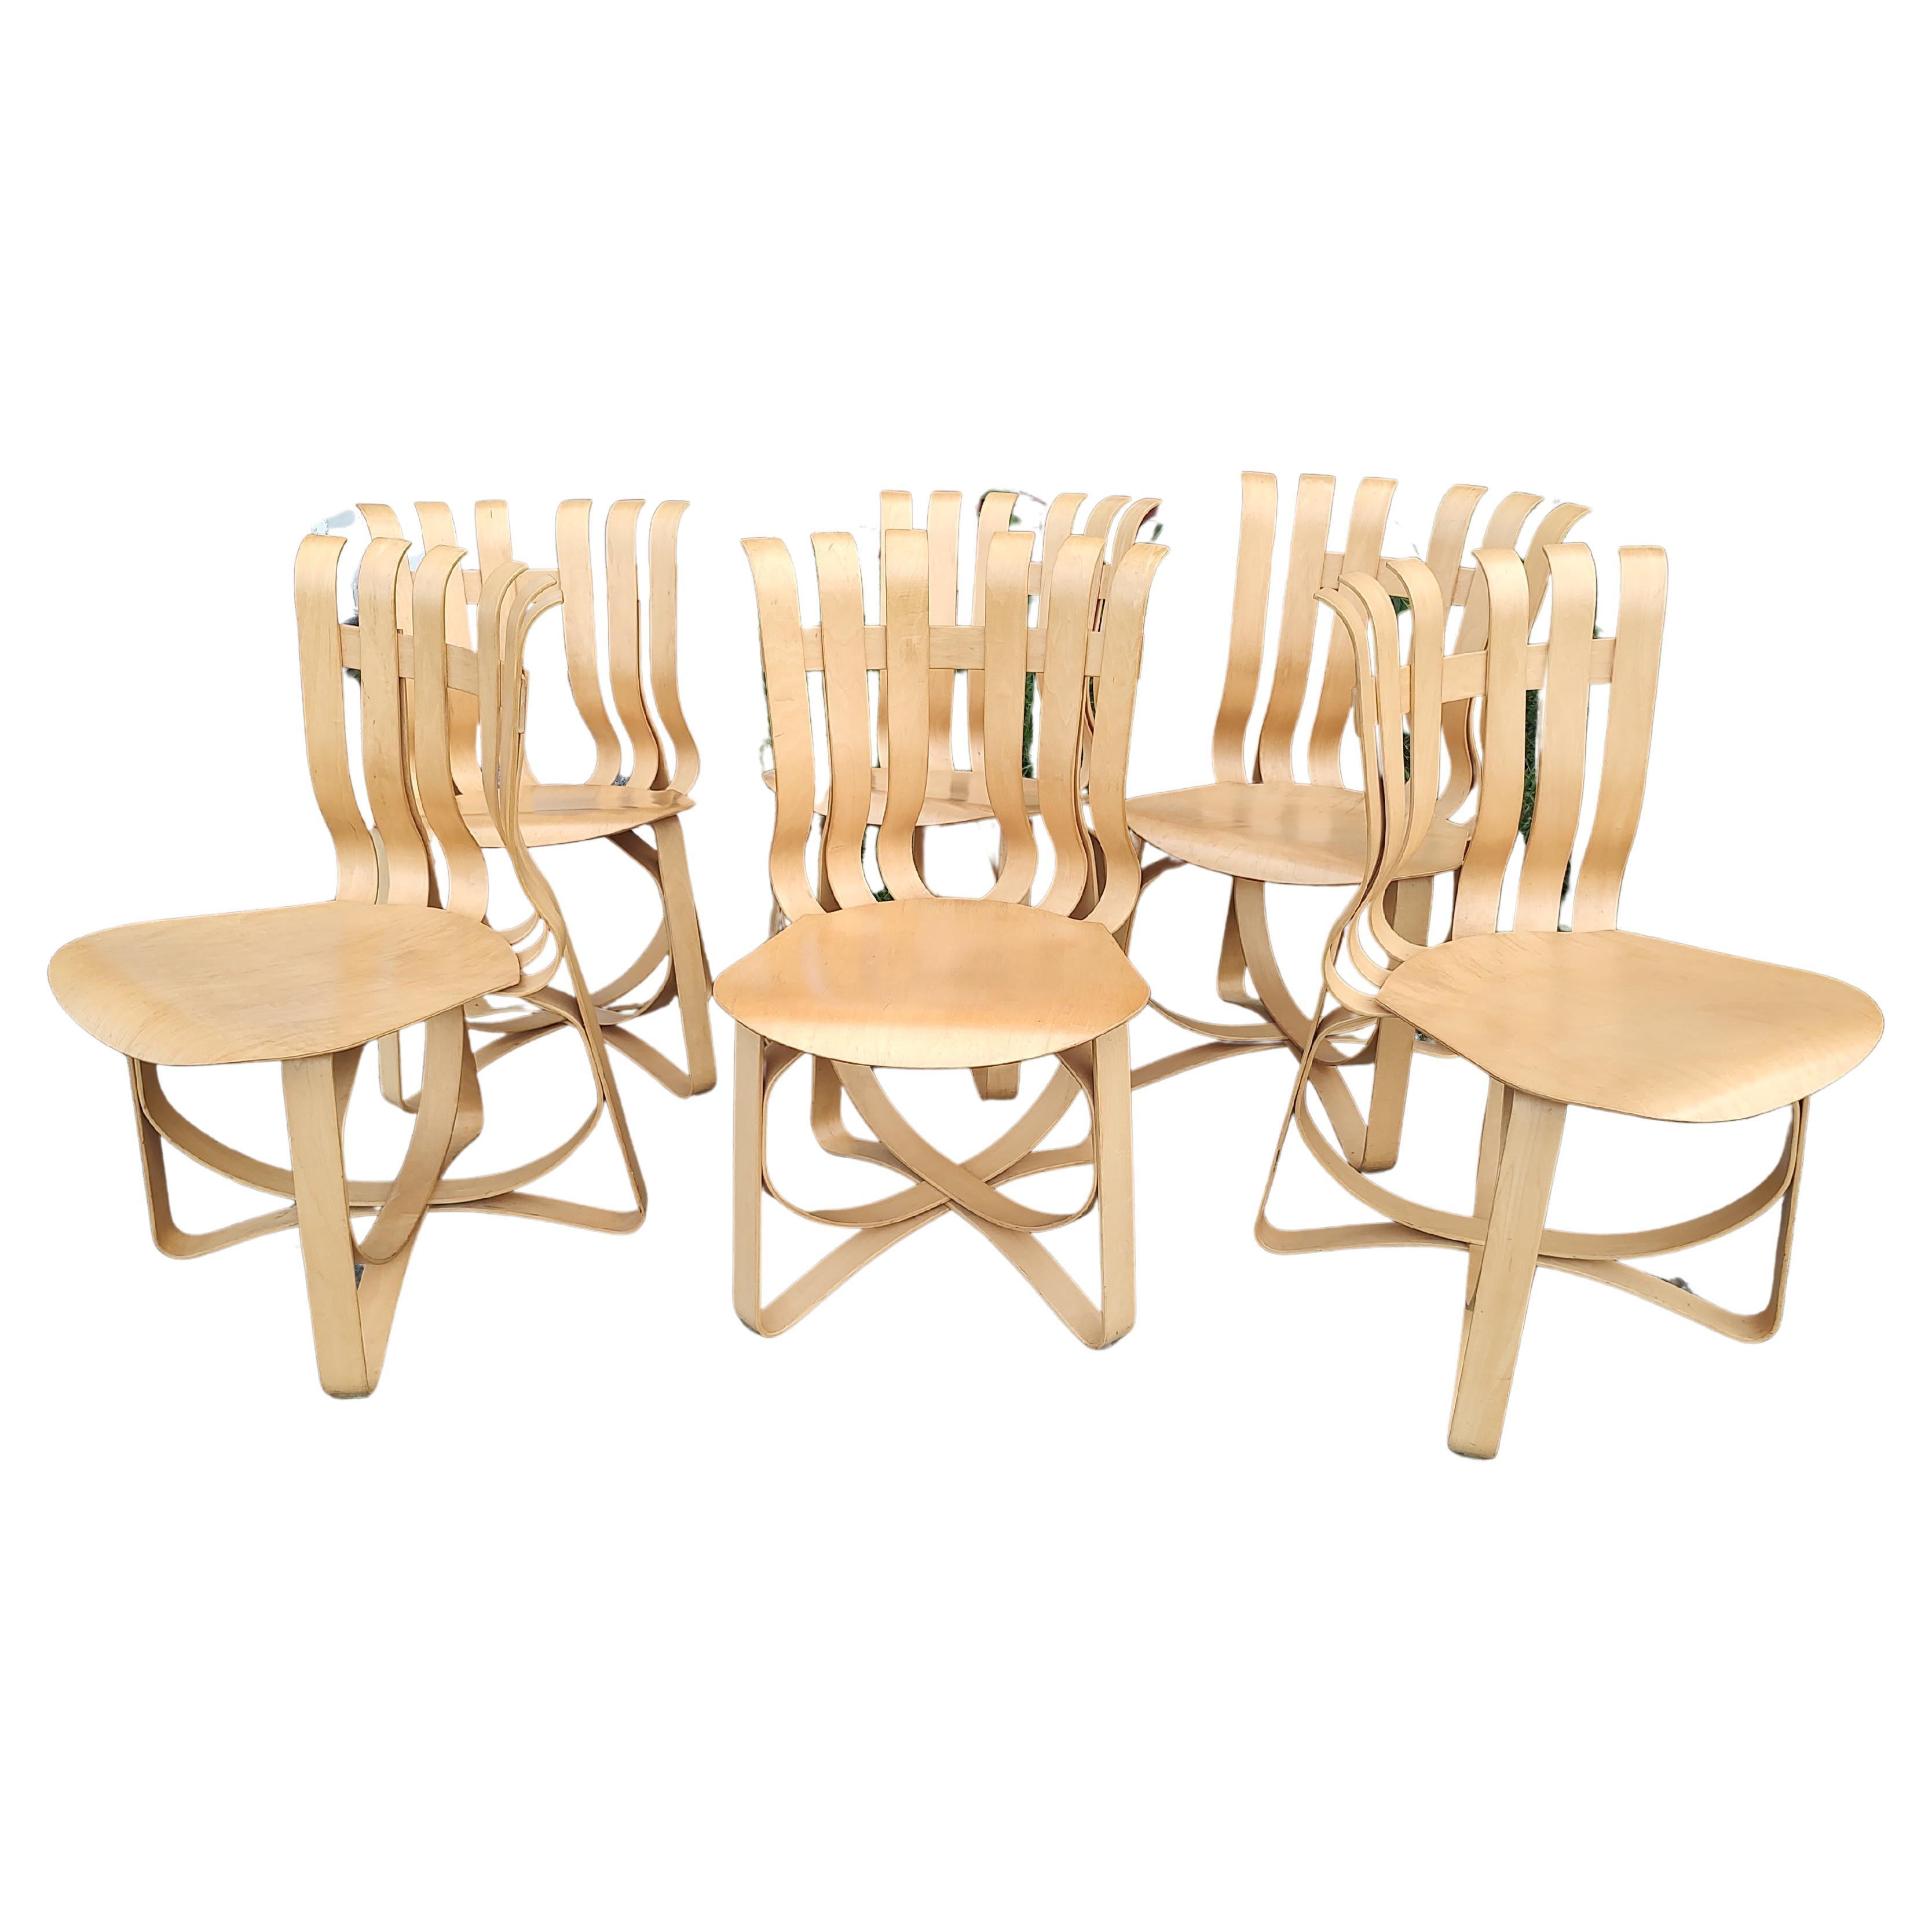 Mid Century Modern Sculptural Birch 6 Hat Trick Chairs by Frank Gehry - Knoll For Sale